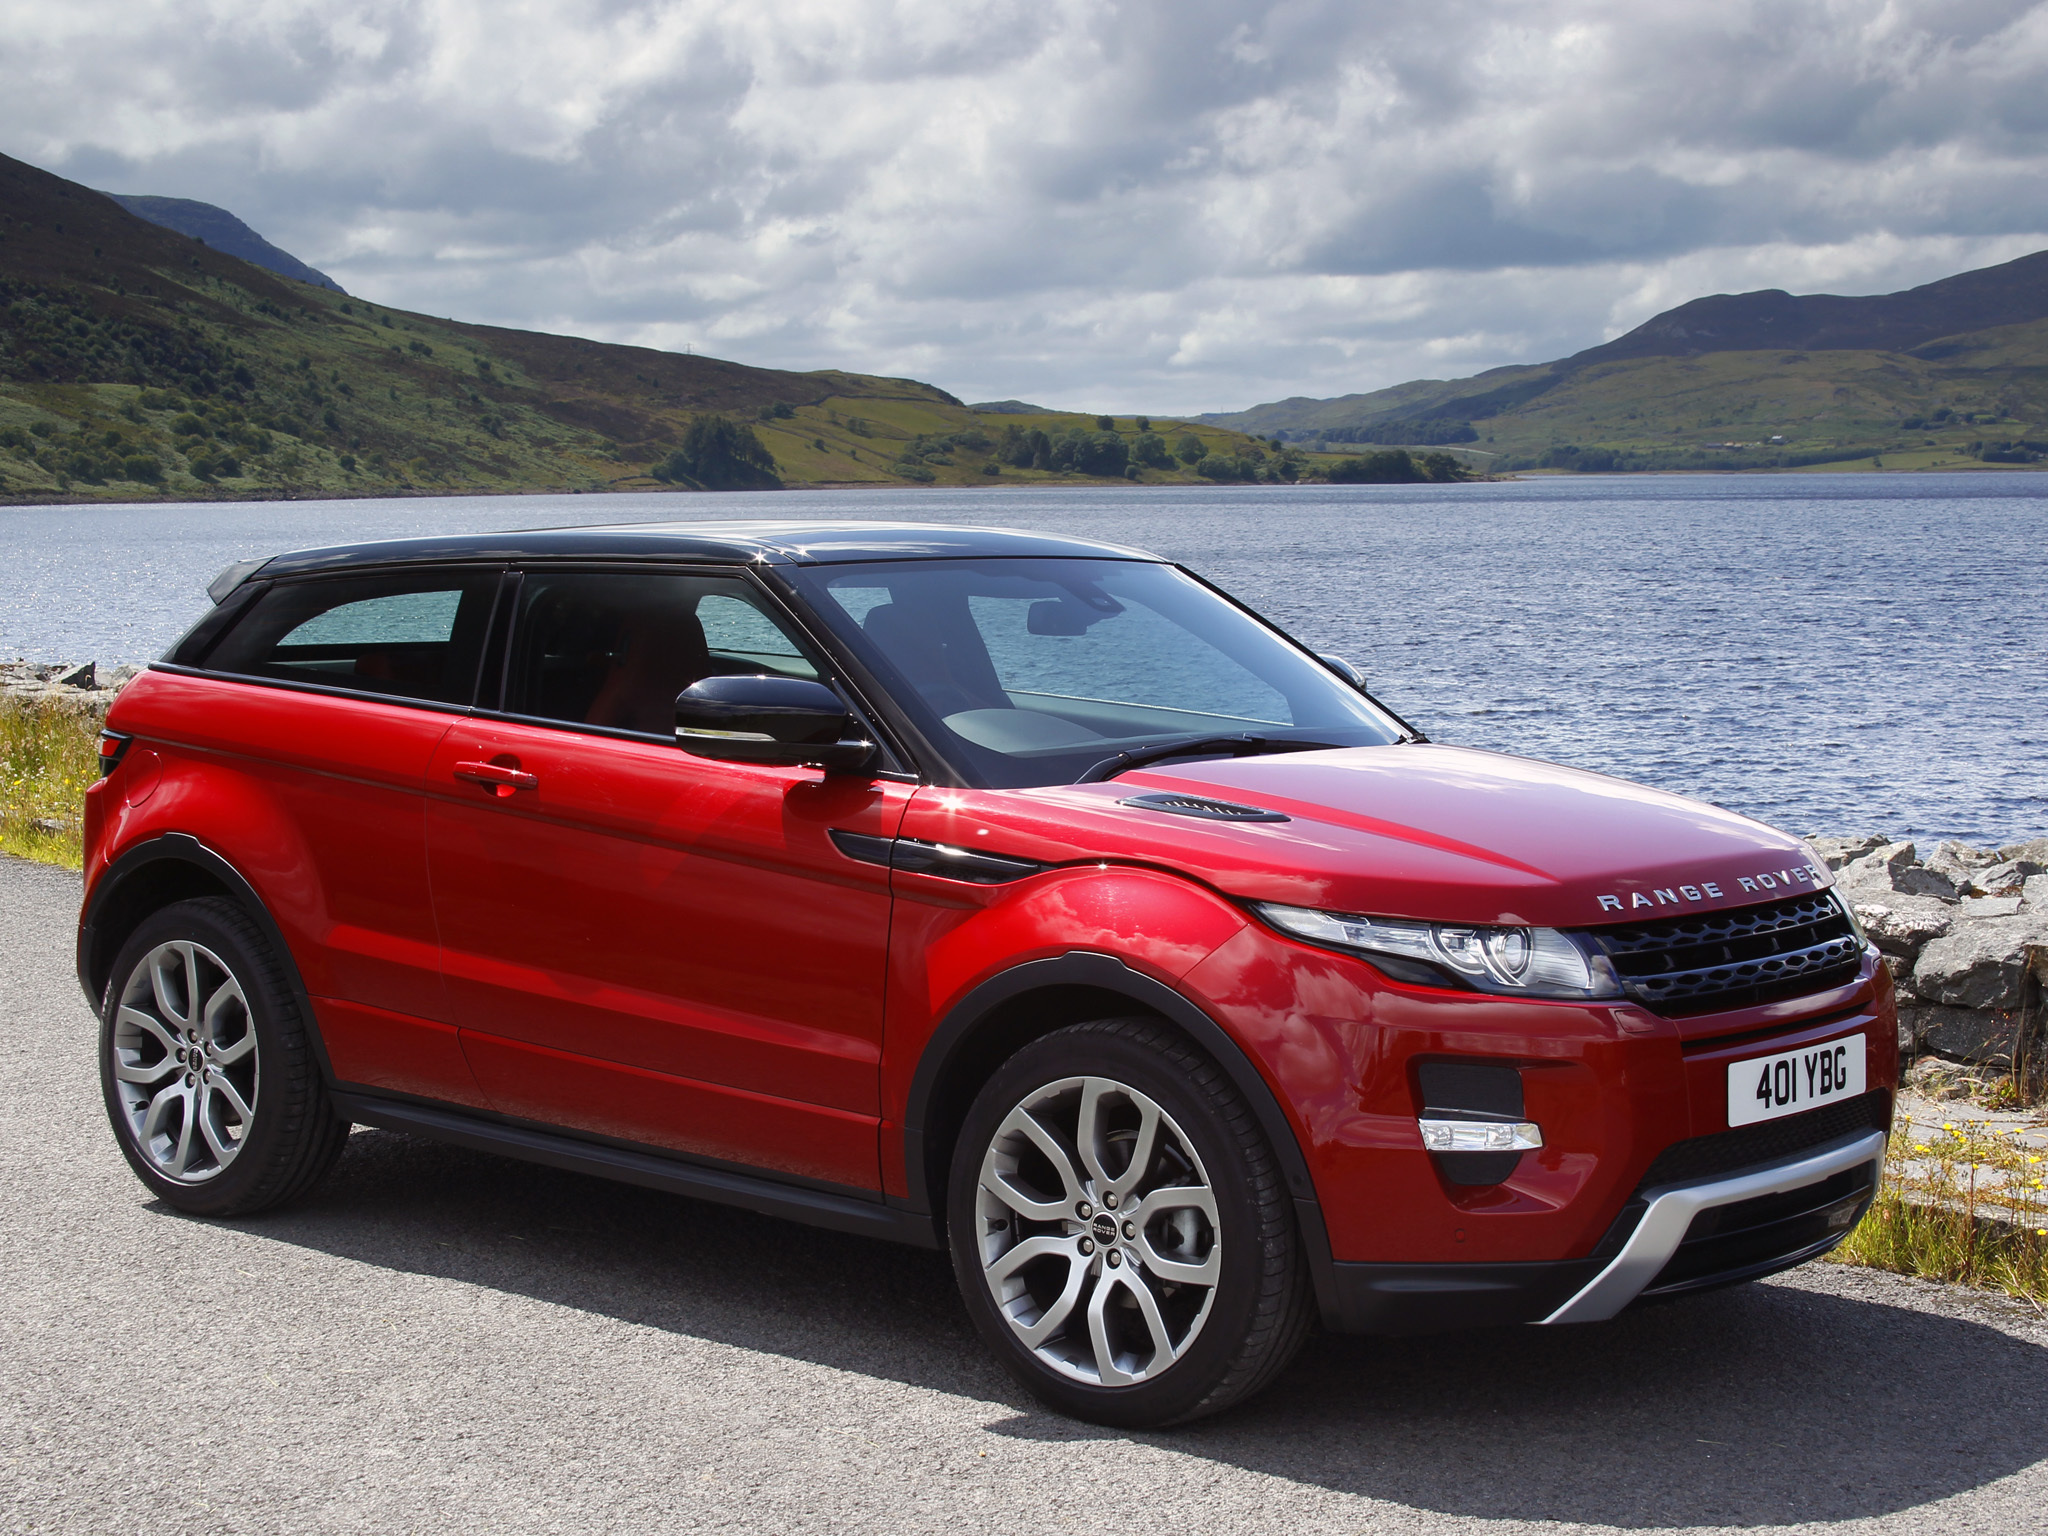 125439 download wallpaper auto, cars, range rover, land rover, red, suv, evoque screensavers and pictures for free